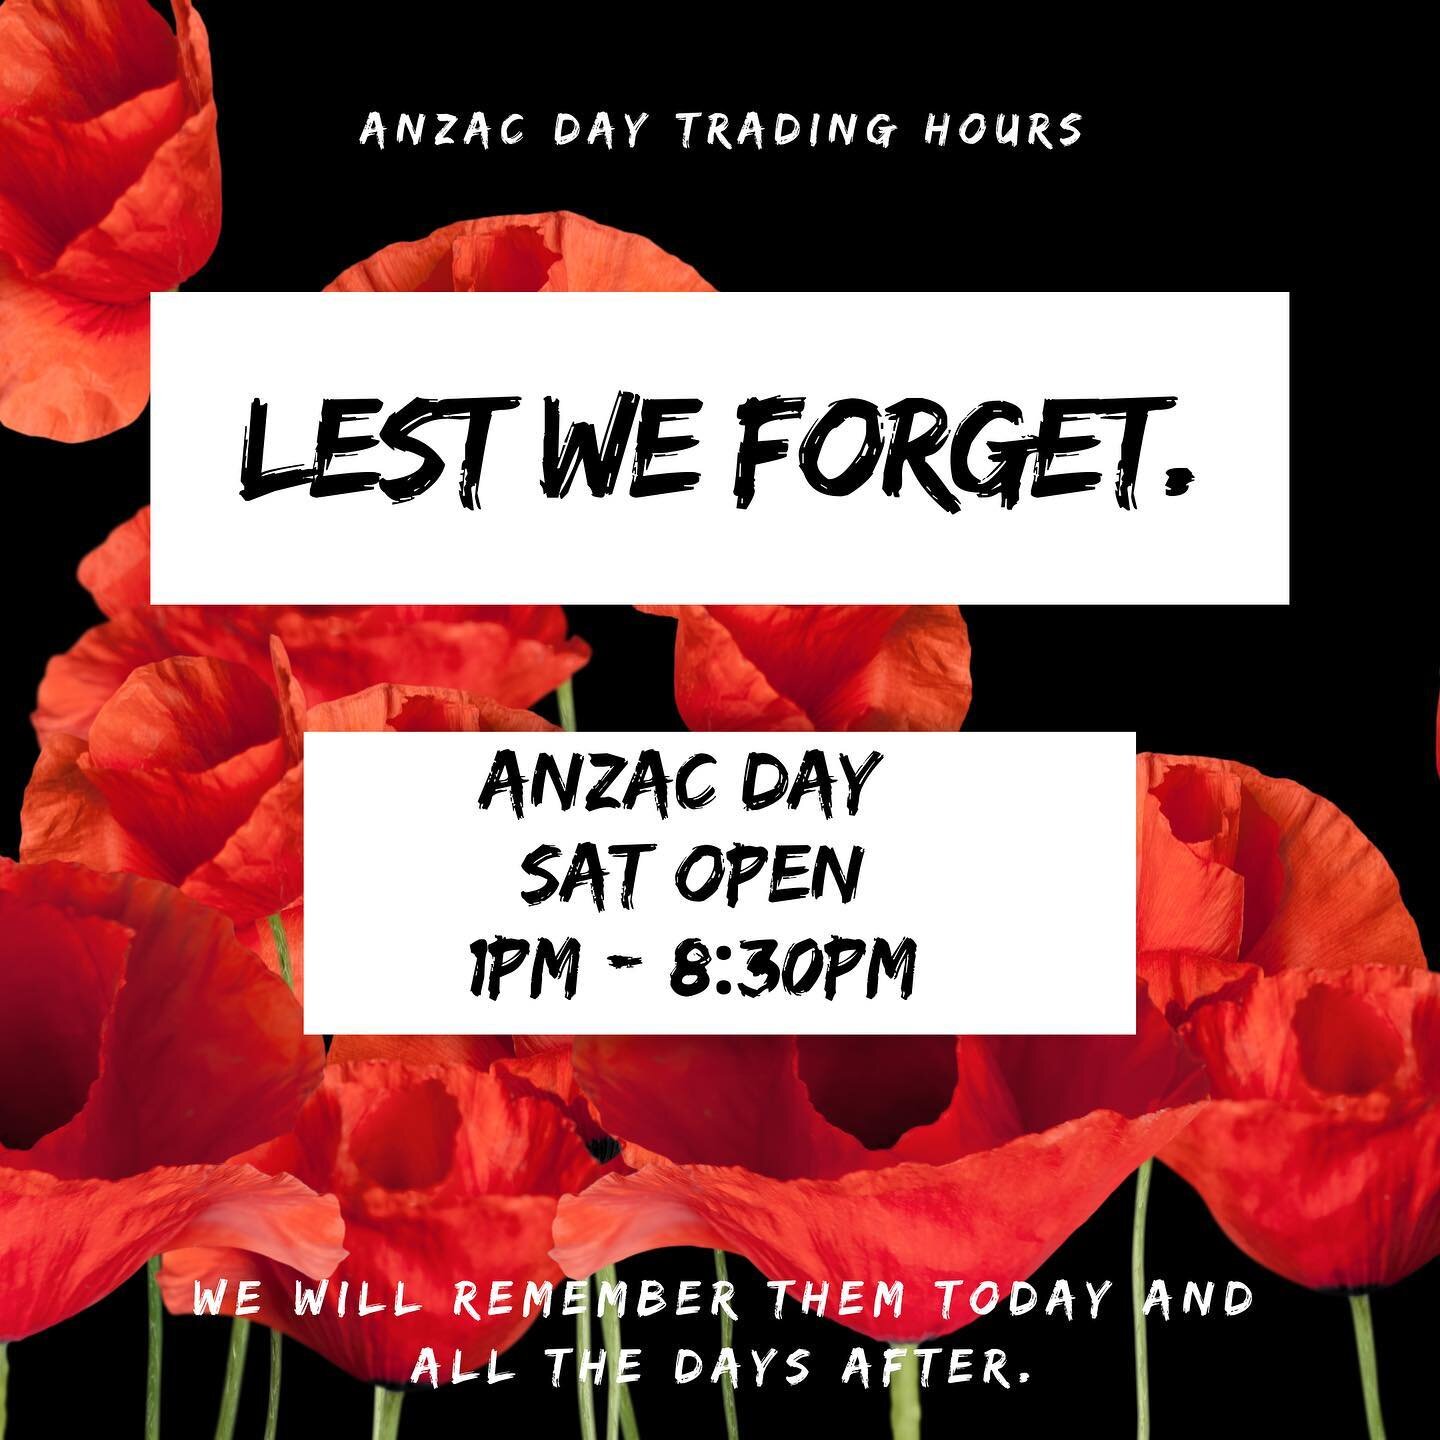 LEST WE FORGET. 🇦🇺🇹🇷 ANZAC DAY TRADING HOURS ▪️1PM - 8:30PM